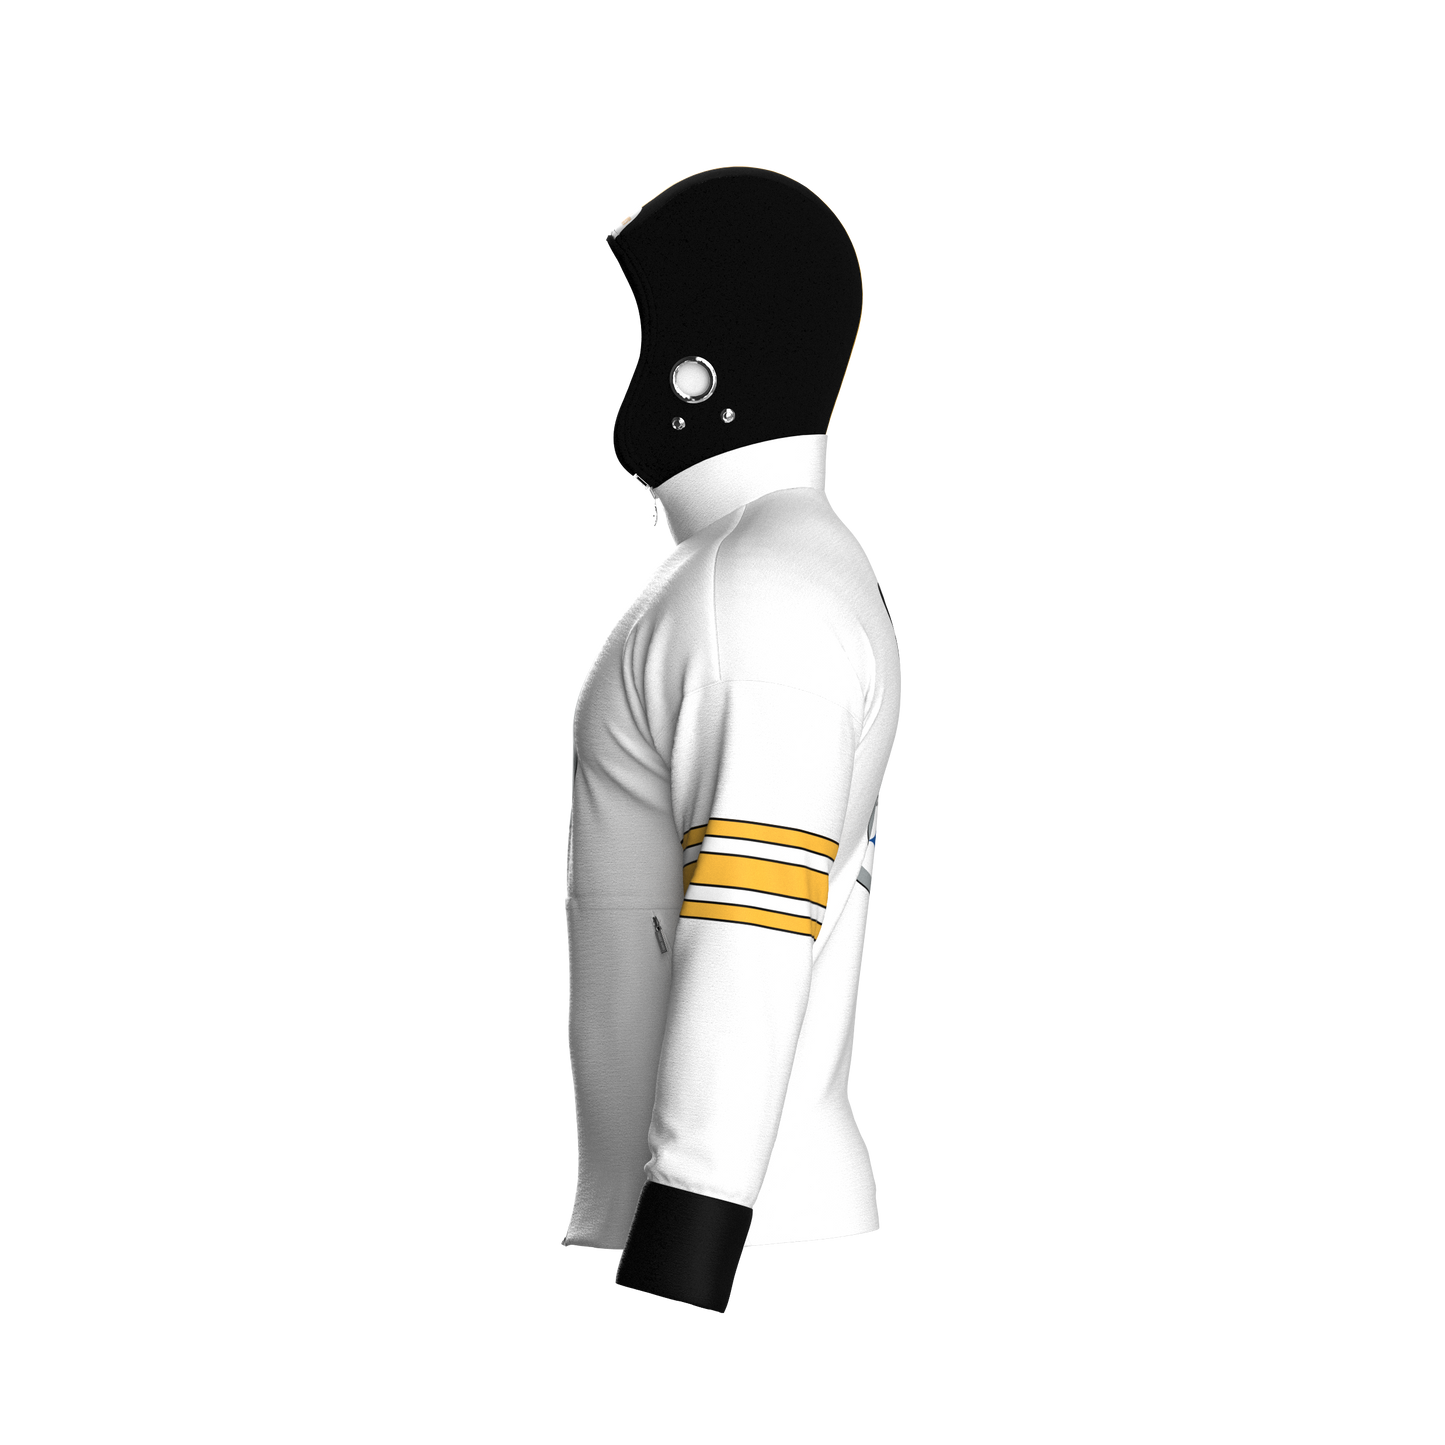 Pittsburgh Steelers Away Zip-Up (youth)